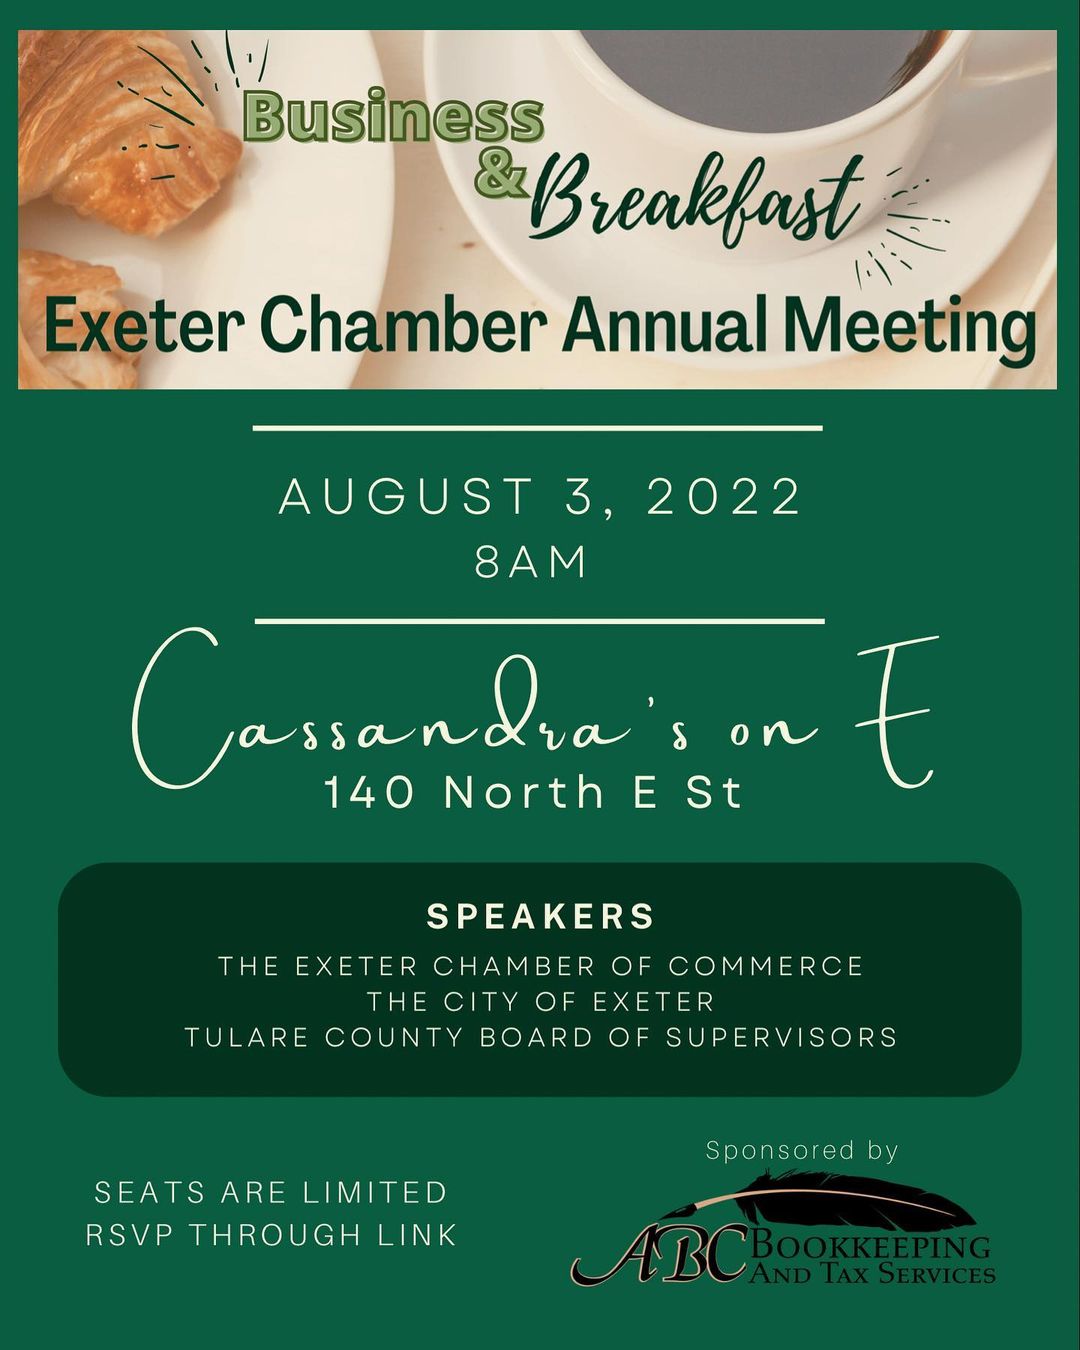 NEW DATE! Our Annual Meeting has a new date. August 3rd at 8am we will have a me…